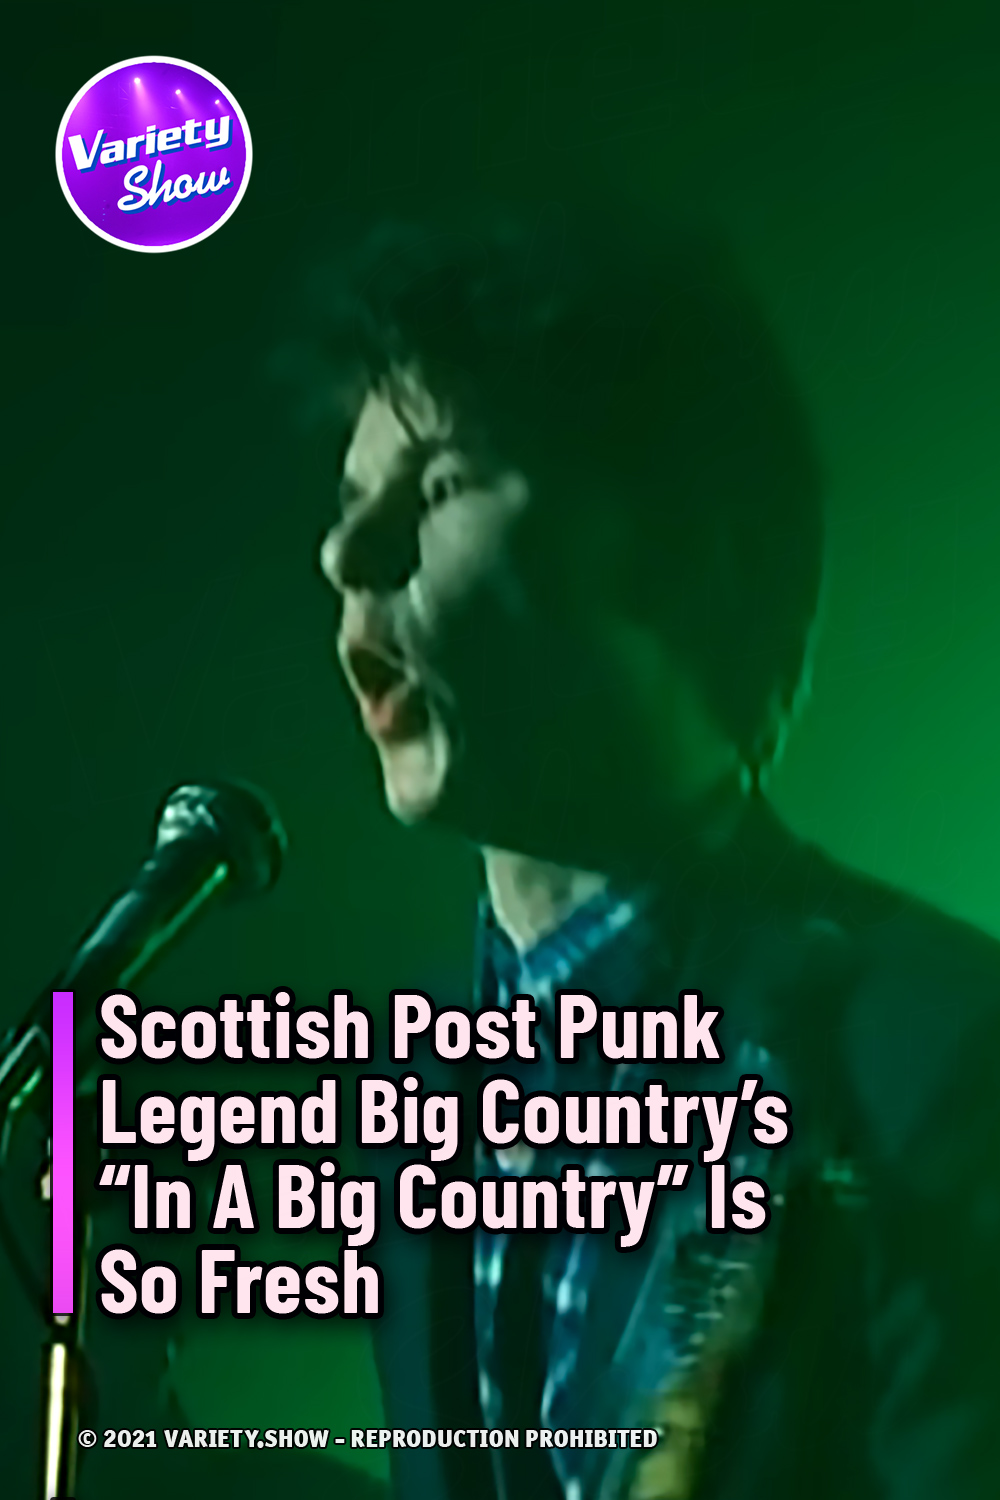 Scottish Post Punk Legend Big Country’s “In A Big Country” Is So Fresh